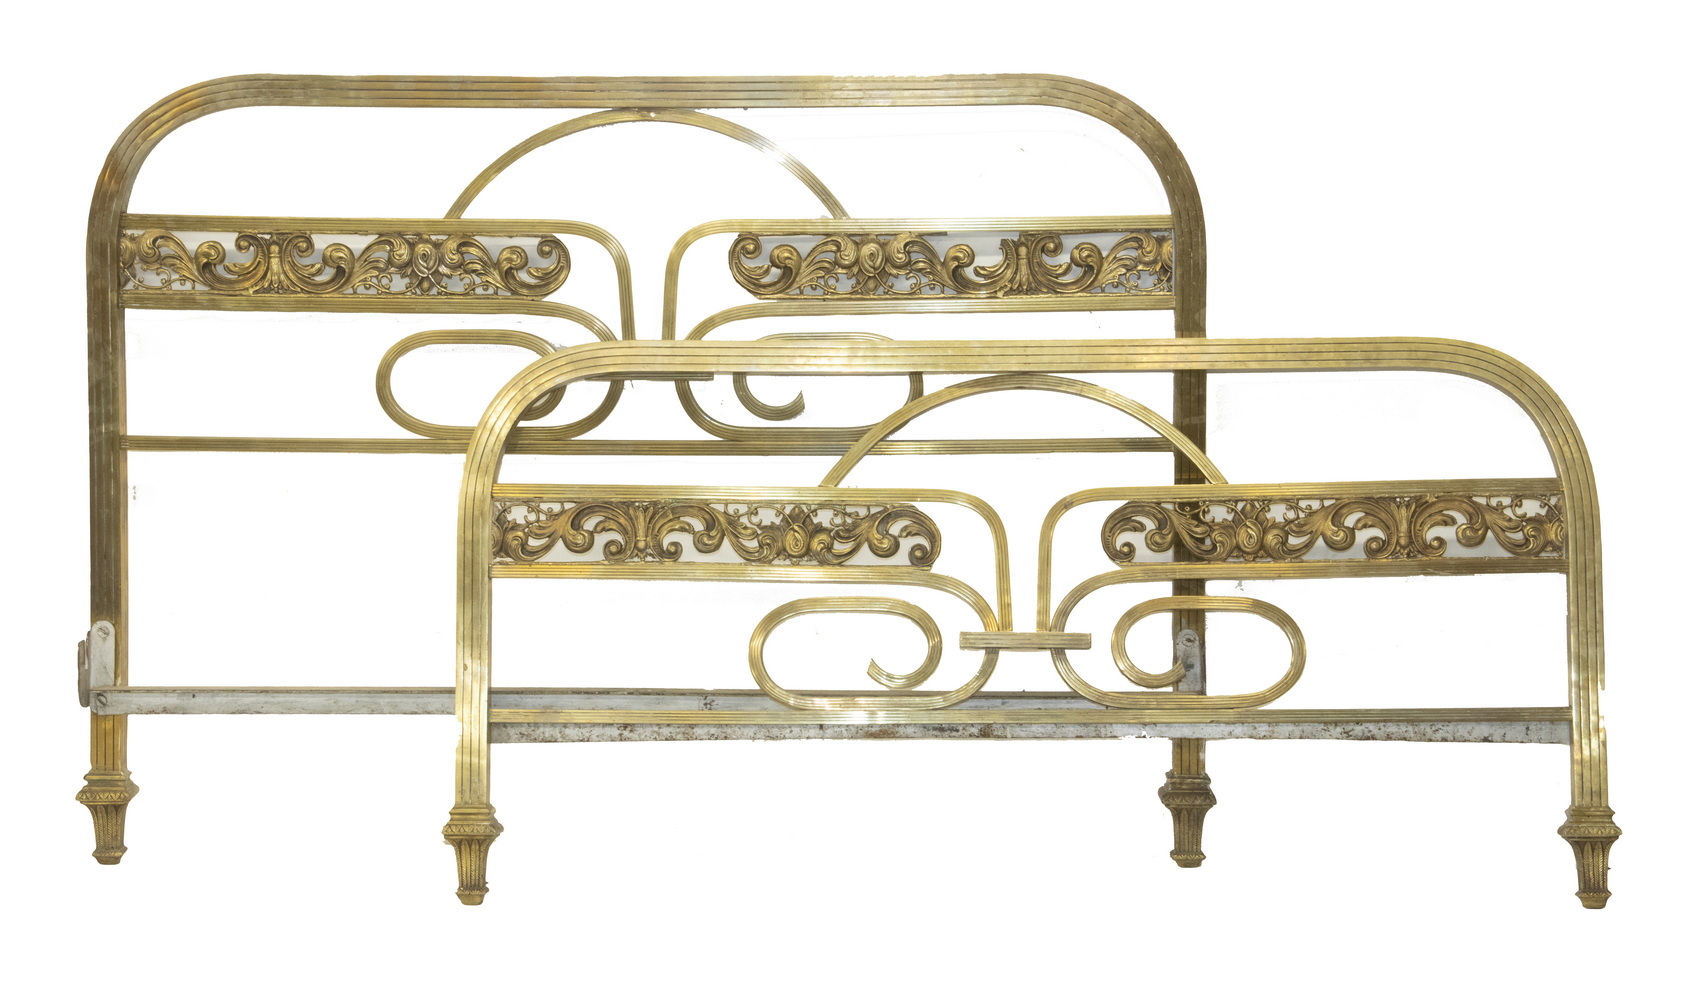 FRENCH FULL SIZE BRASS BED Circa